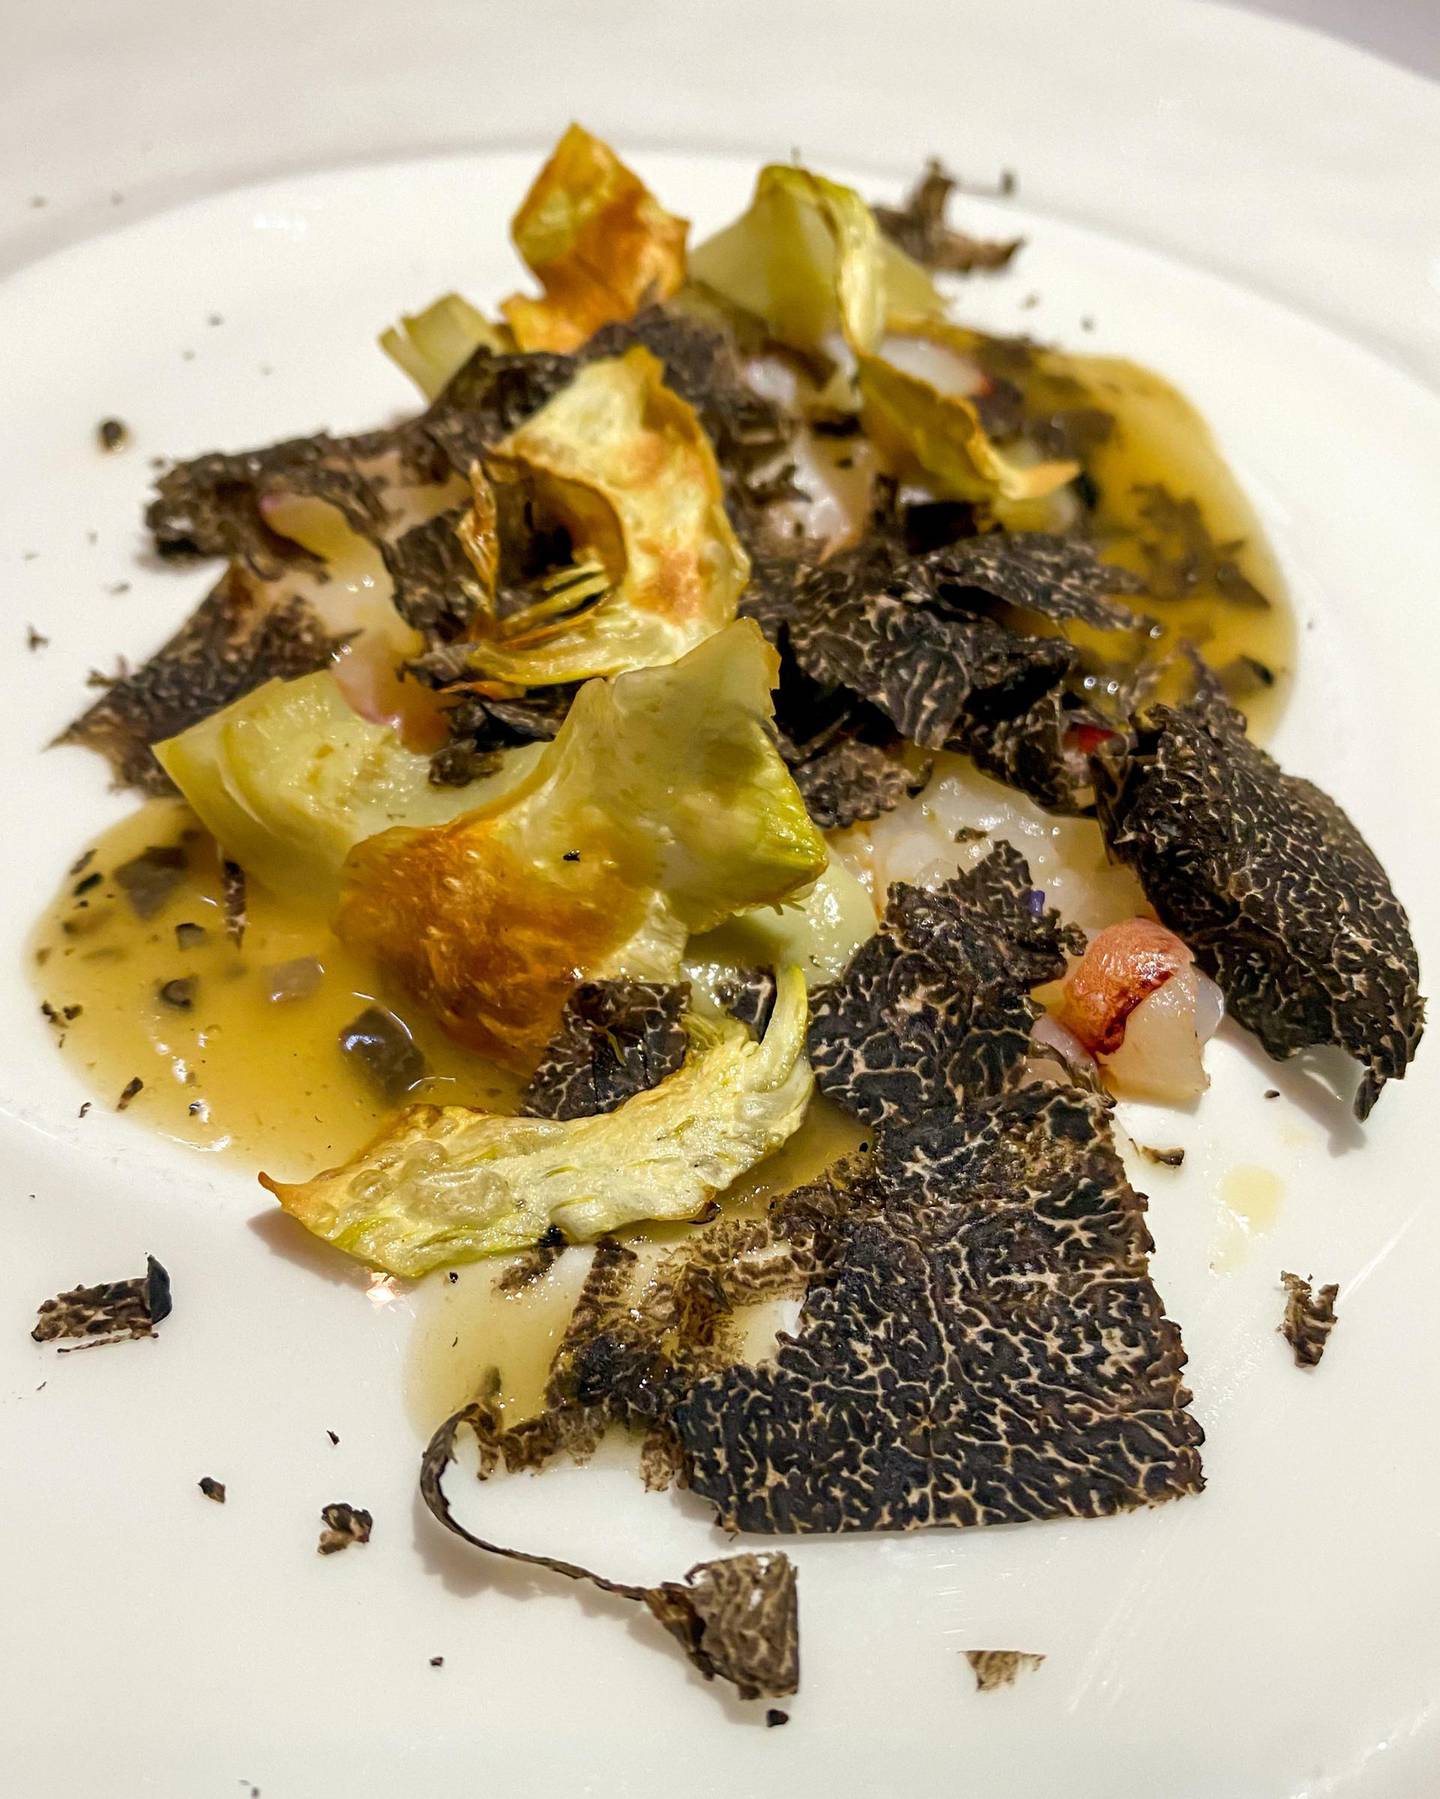 Beck says even rich meats can be cooked in a healthy manner; seen here, lobster with artichoke and truffle 